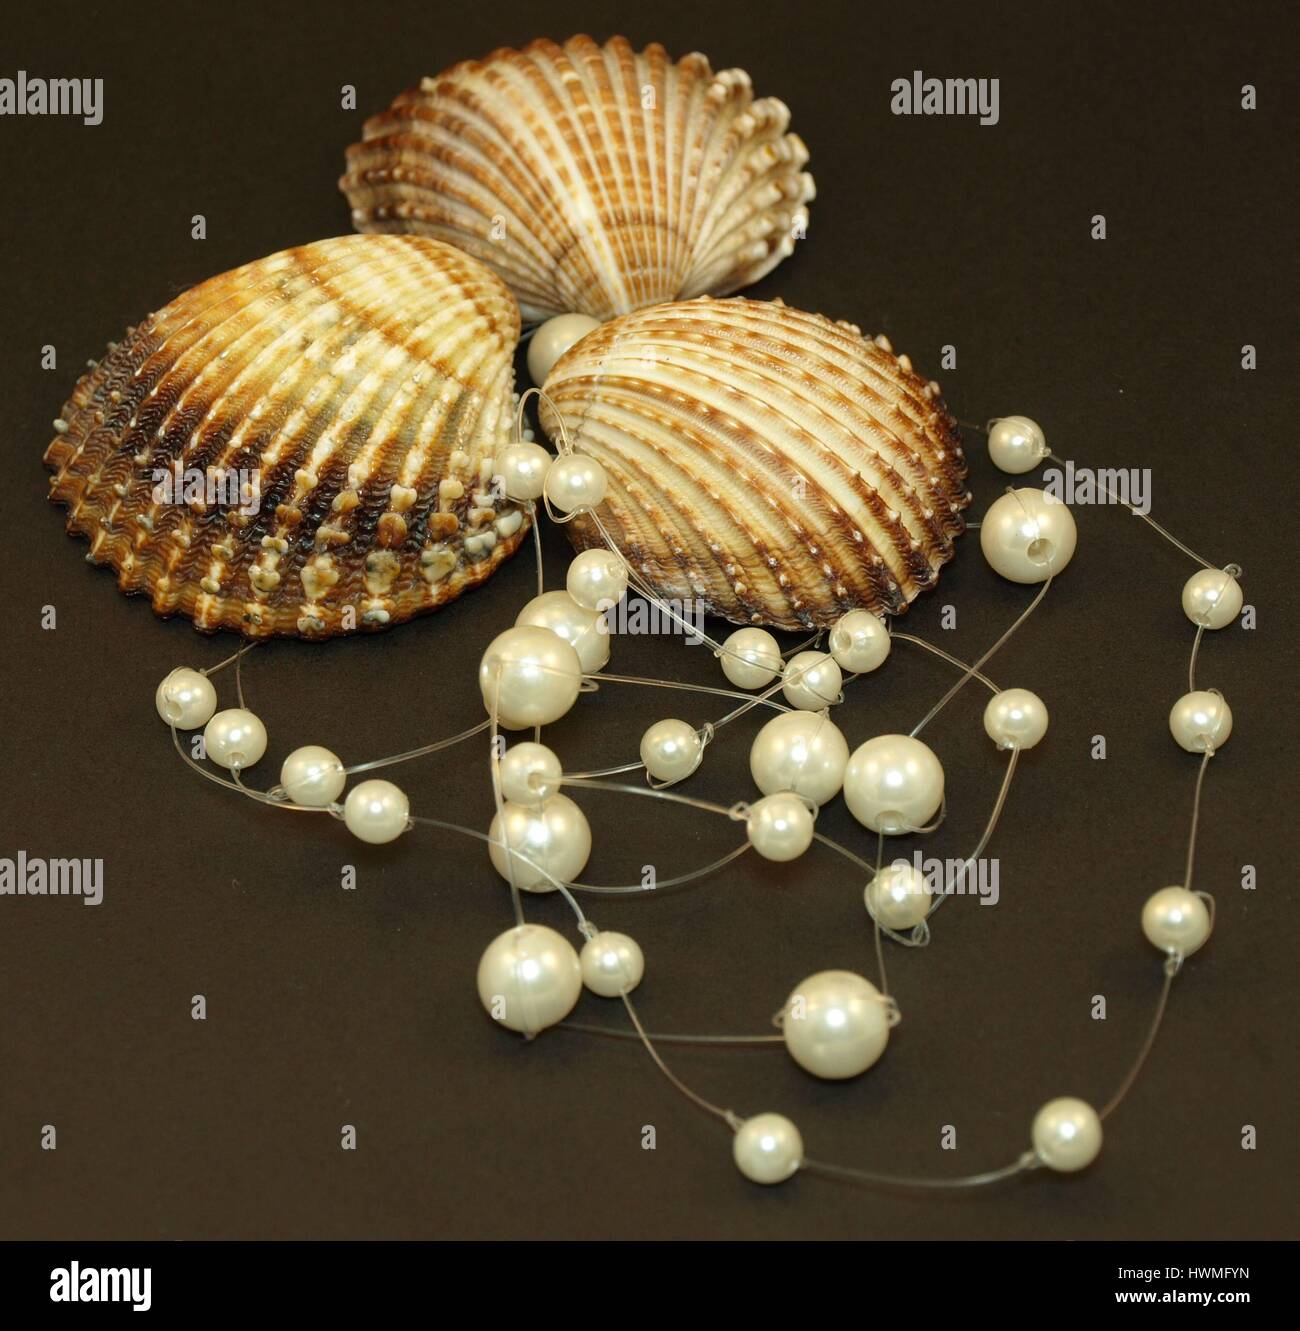 Shell with pearls Stock Photo